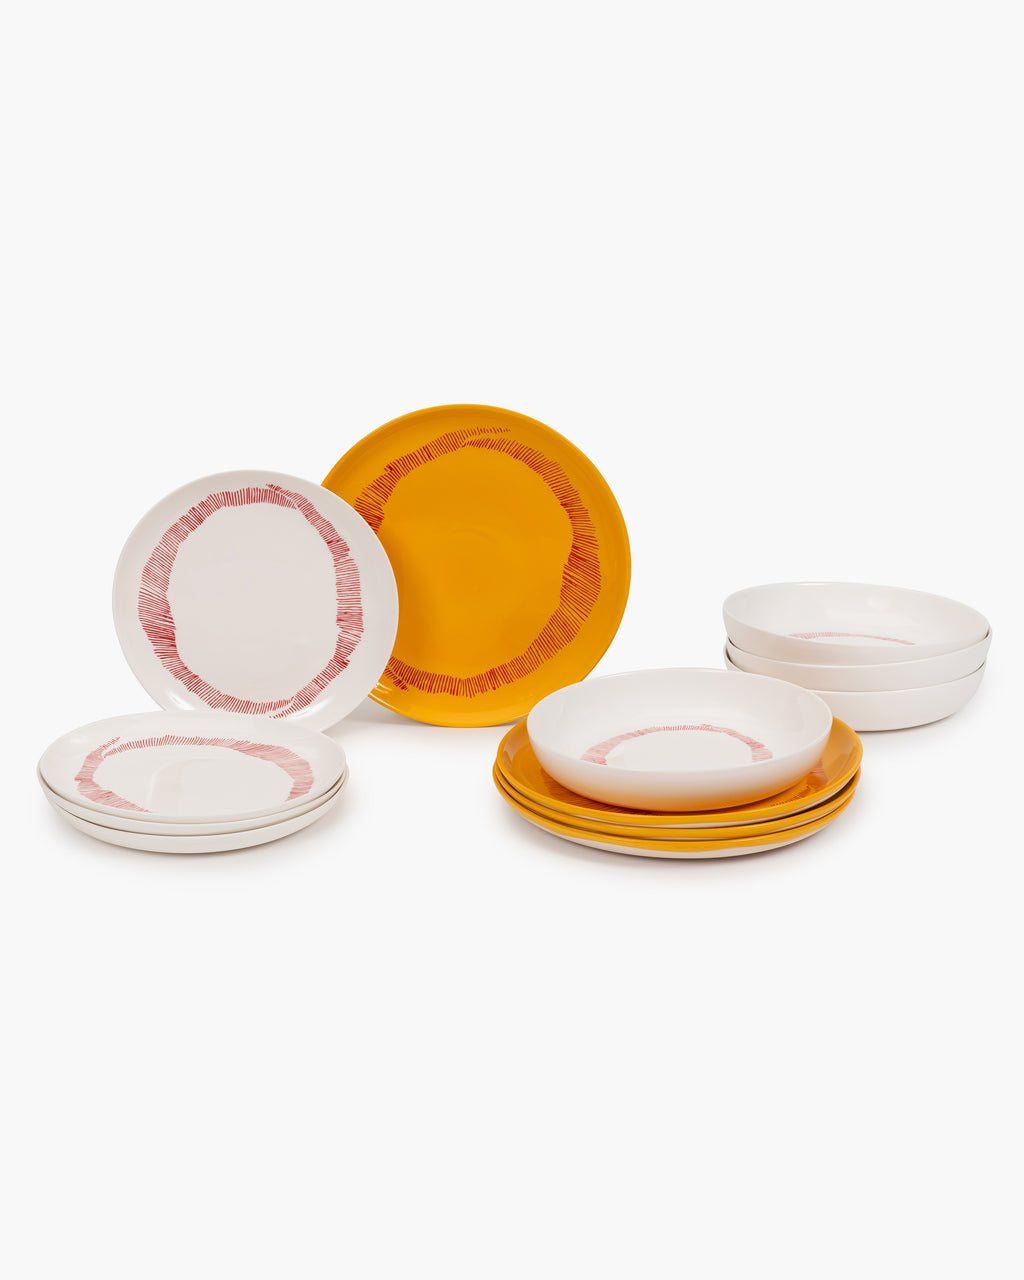 Dinner Set 12 pieces - Feast tableware by Ottolenghi - White